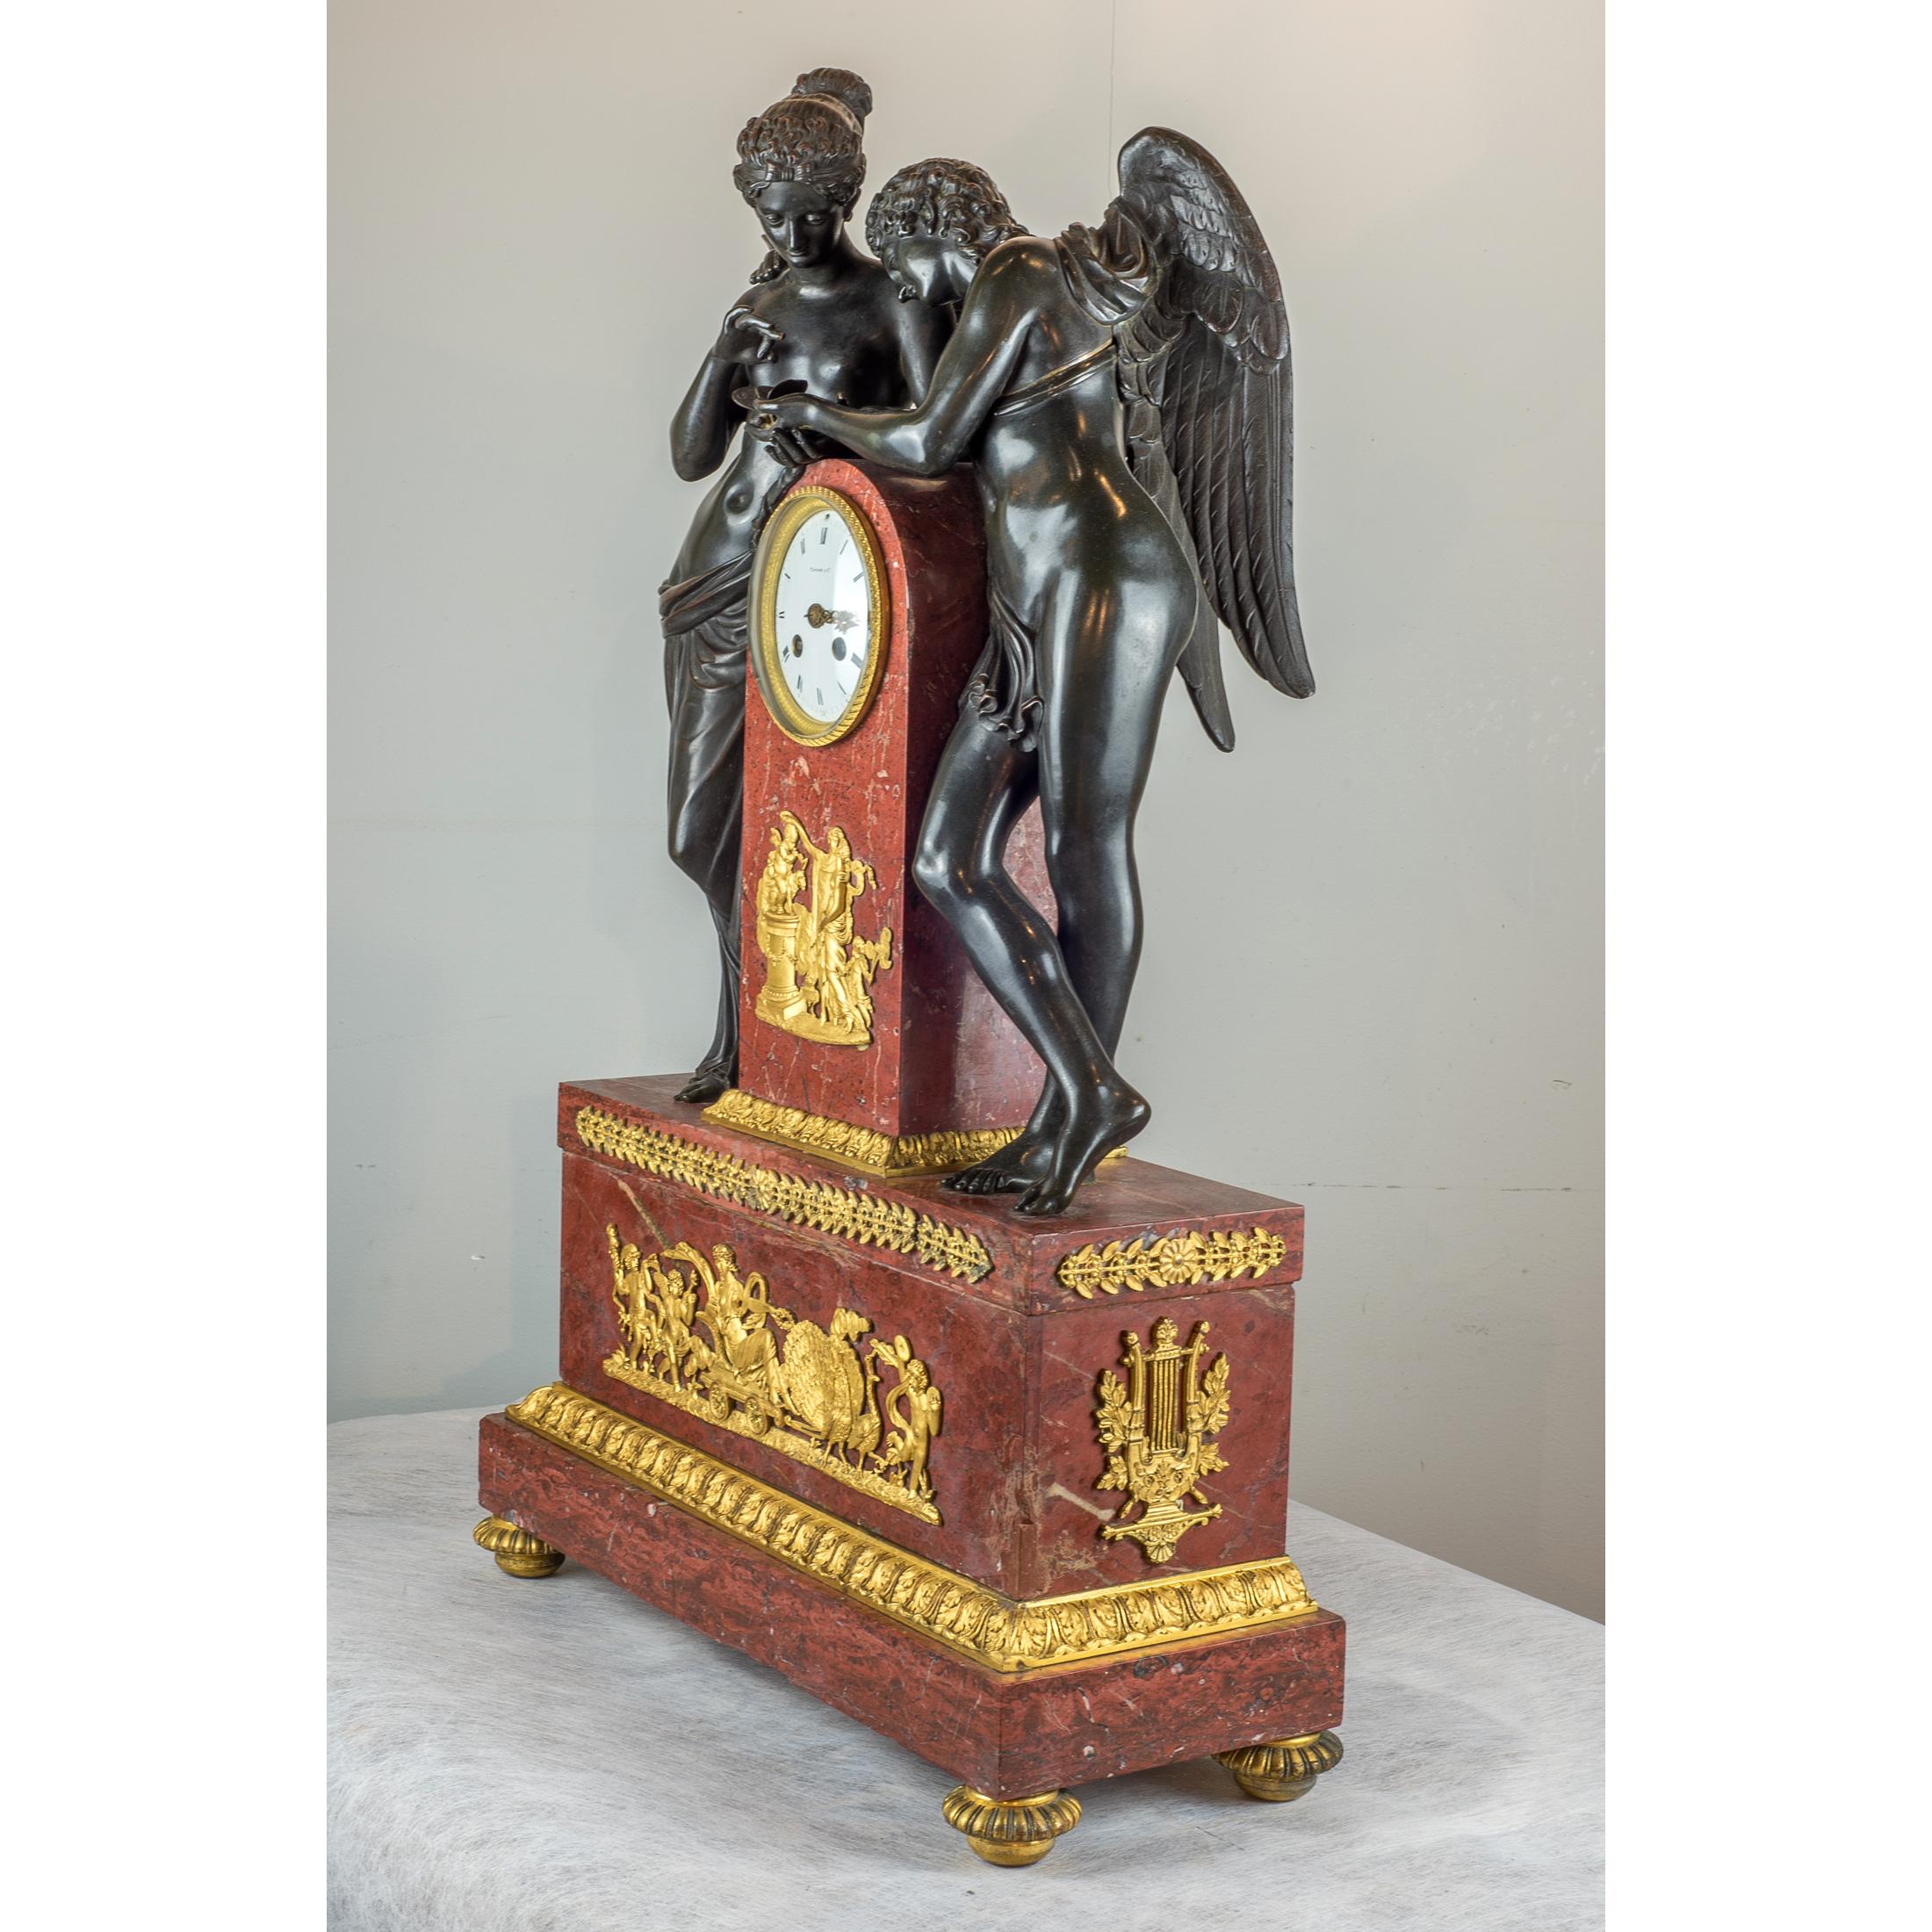 French Exquisite Figural Mantel Clock Retailed by Tiffany & Co. Signed Thomire